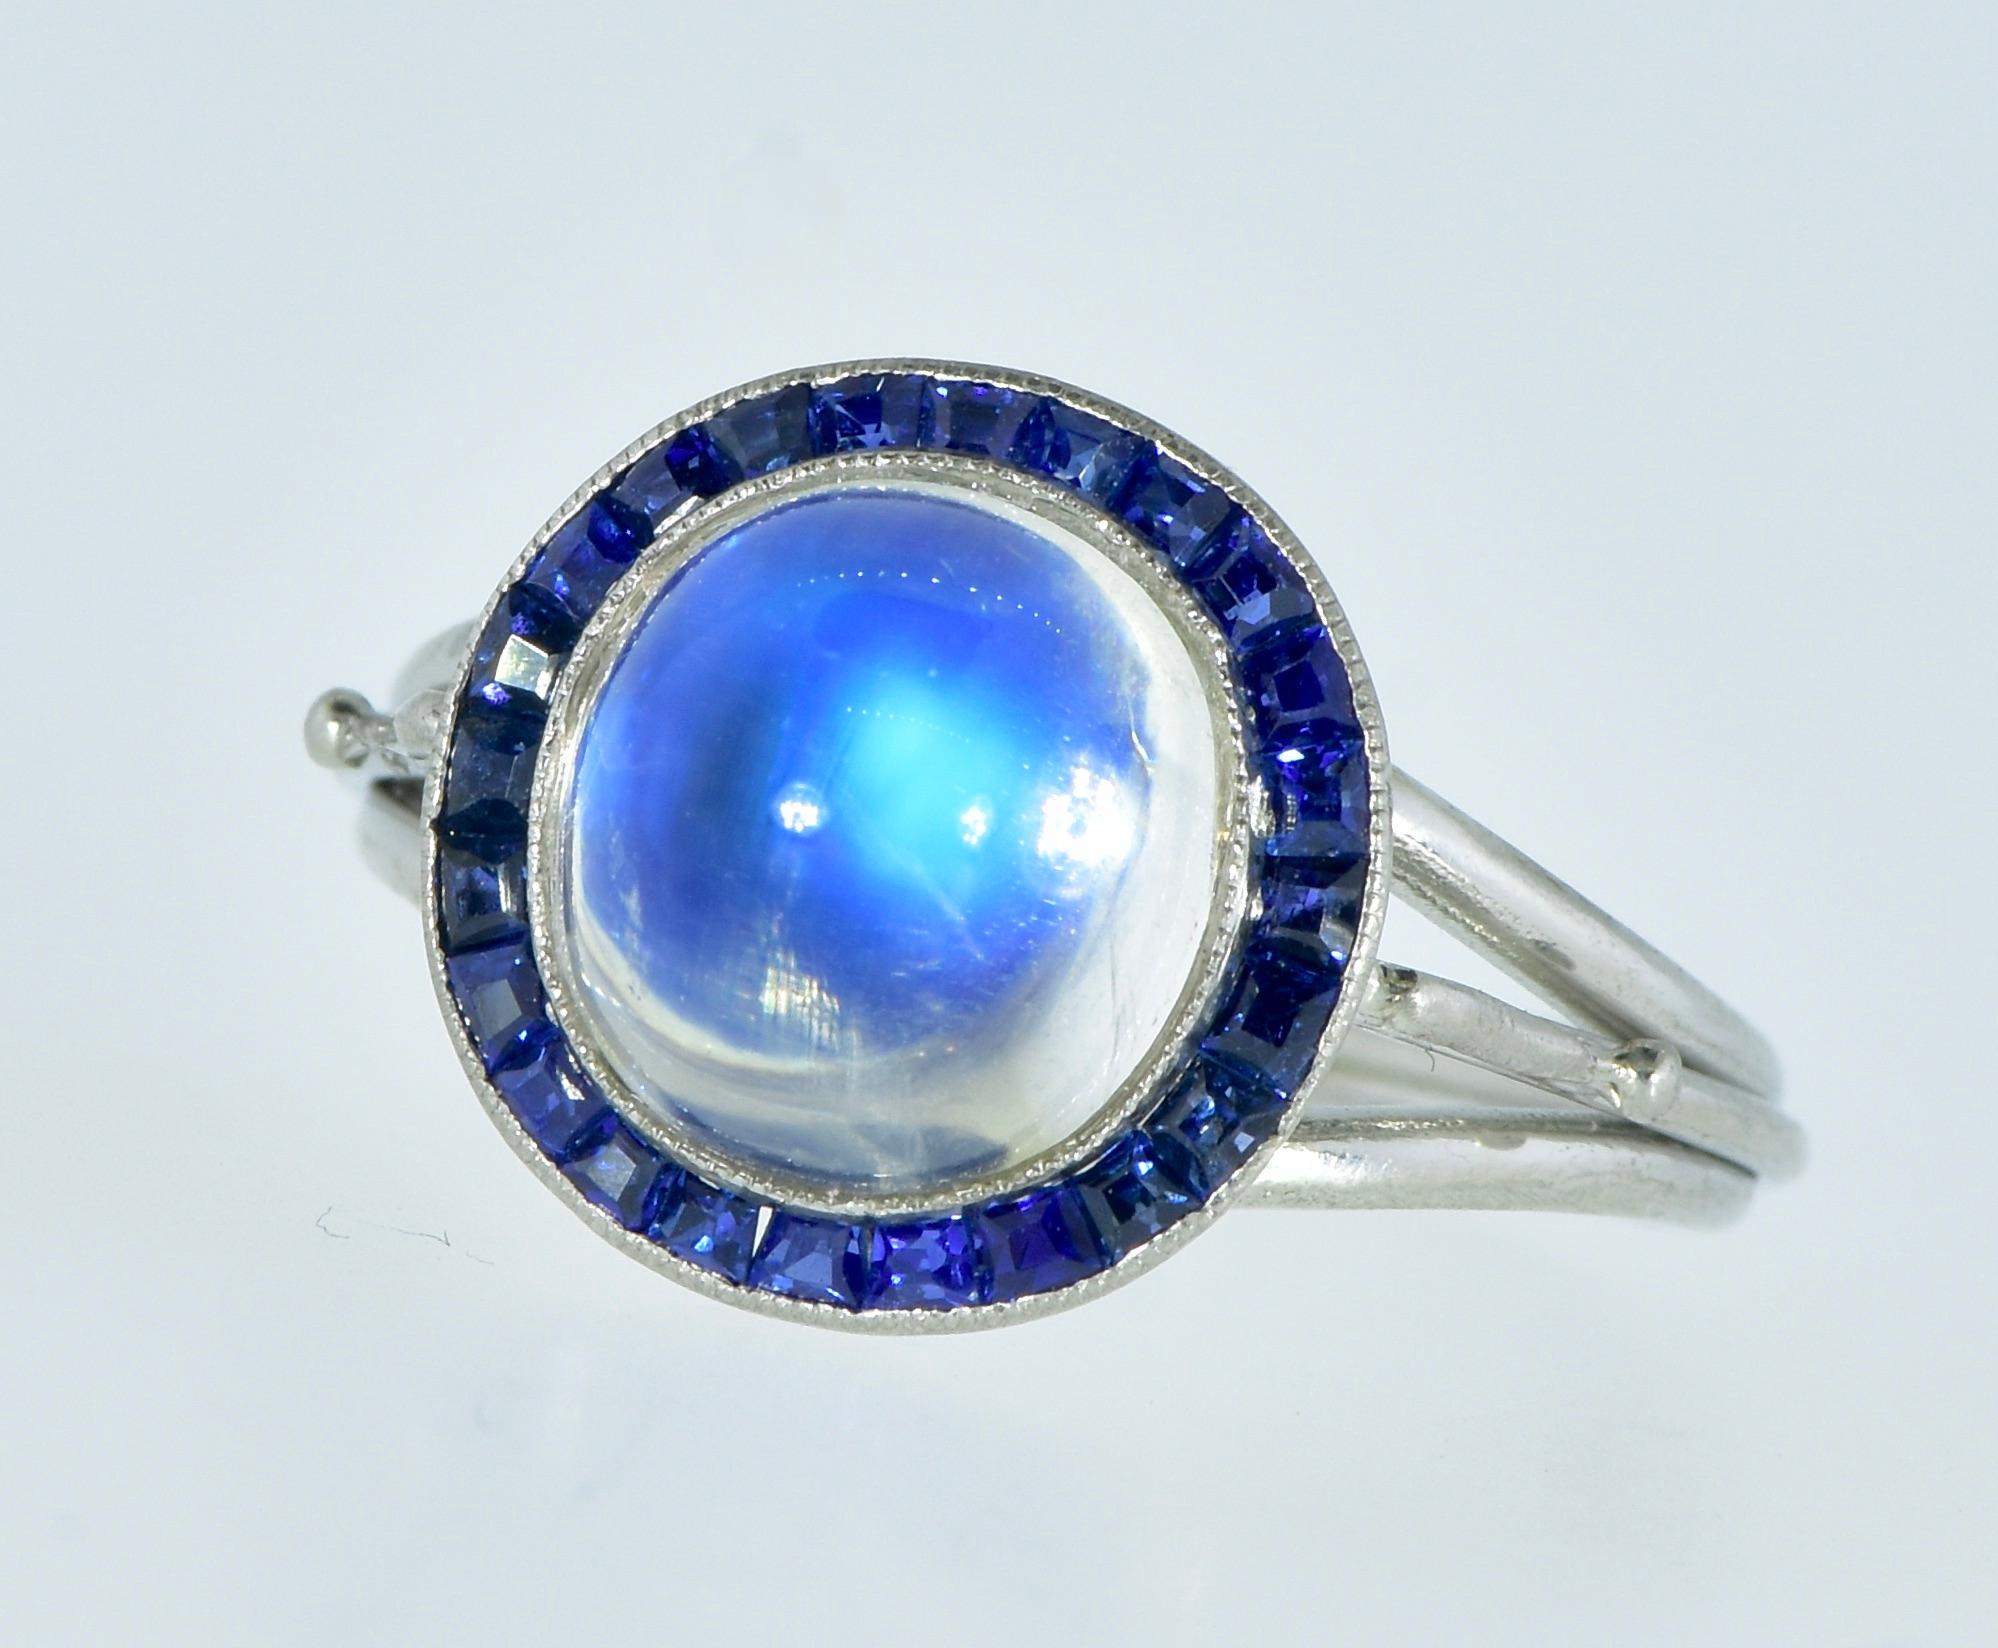 Fine moonstone probably from Burma or Ceylon, weighing an estimated 5.5 cts., displaying a blue hue, this high cabochon is encircle by natural vivid blue sapphires.  The 23 sapphires are well cut and well matched, they are estimated to weigh 1.38